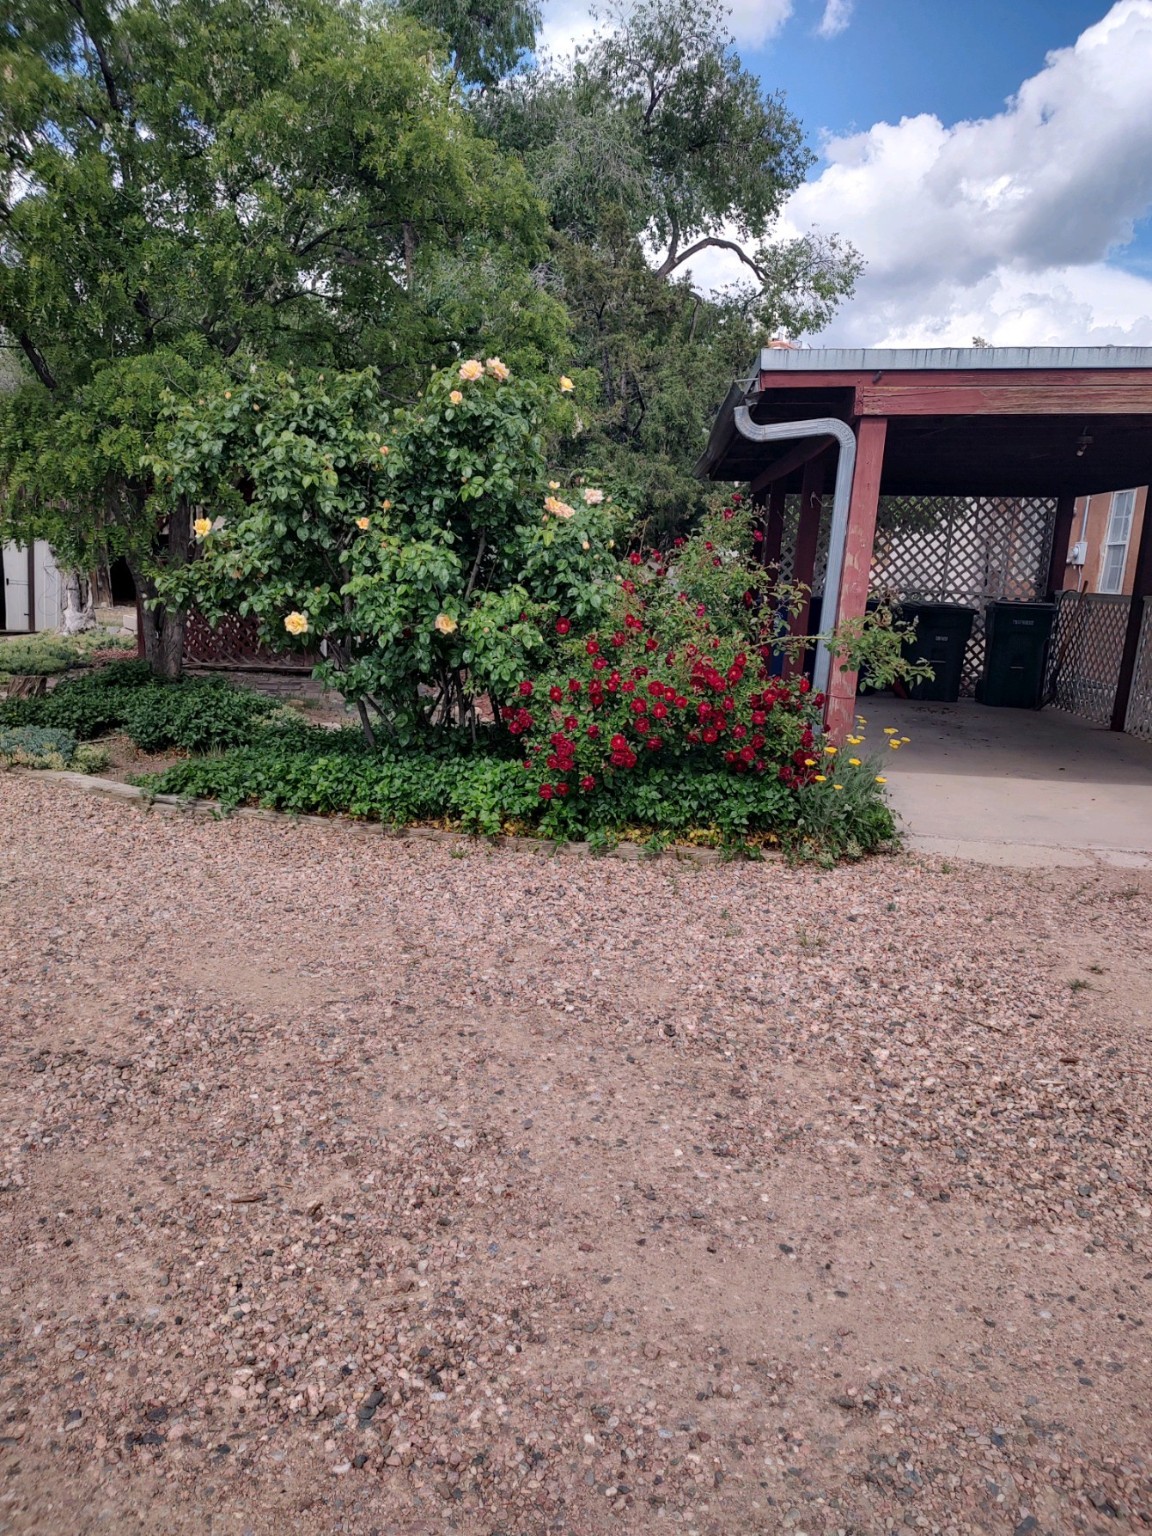 Carport and Roses